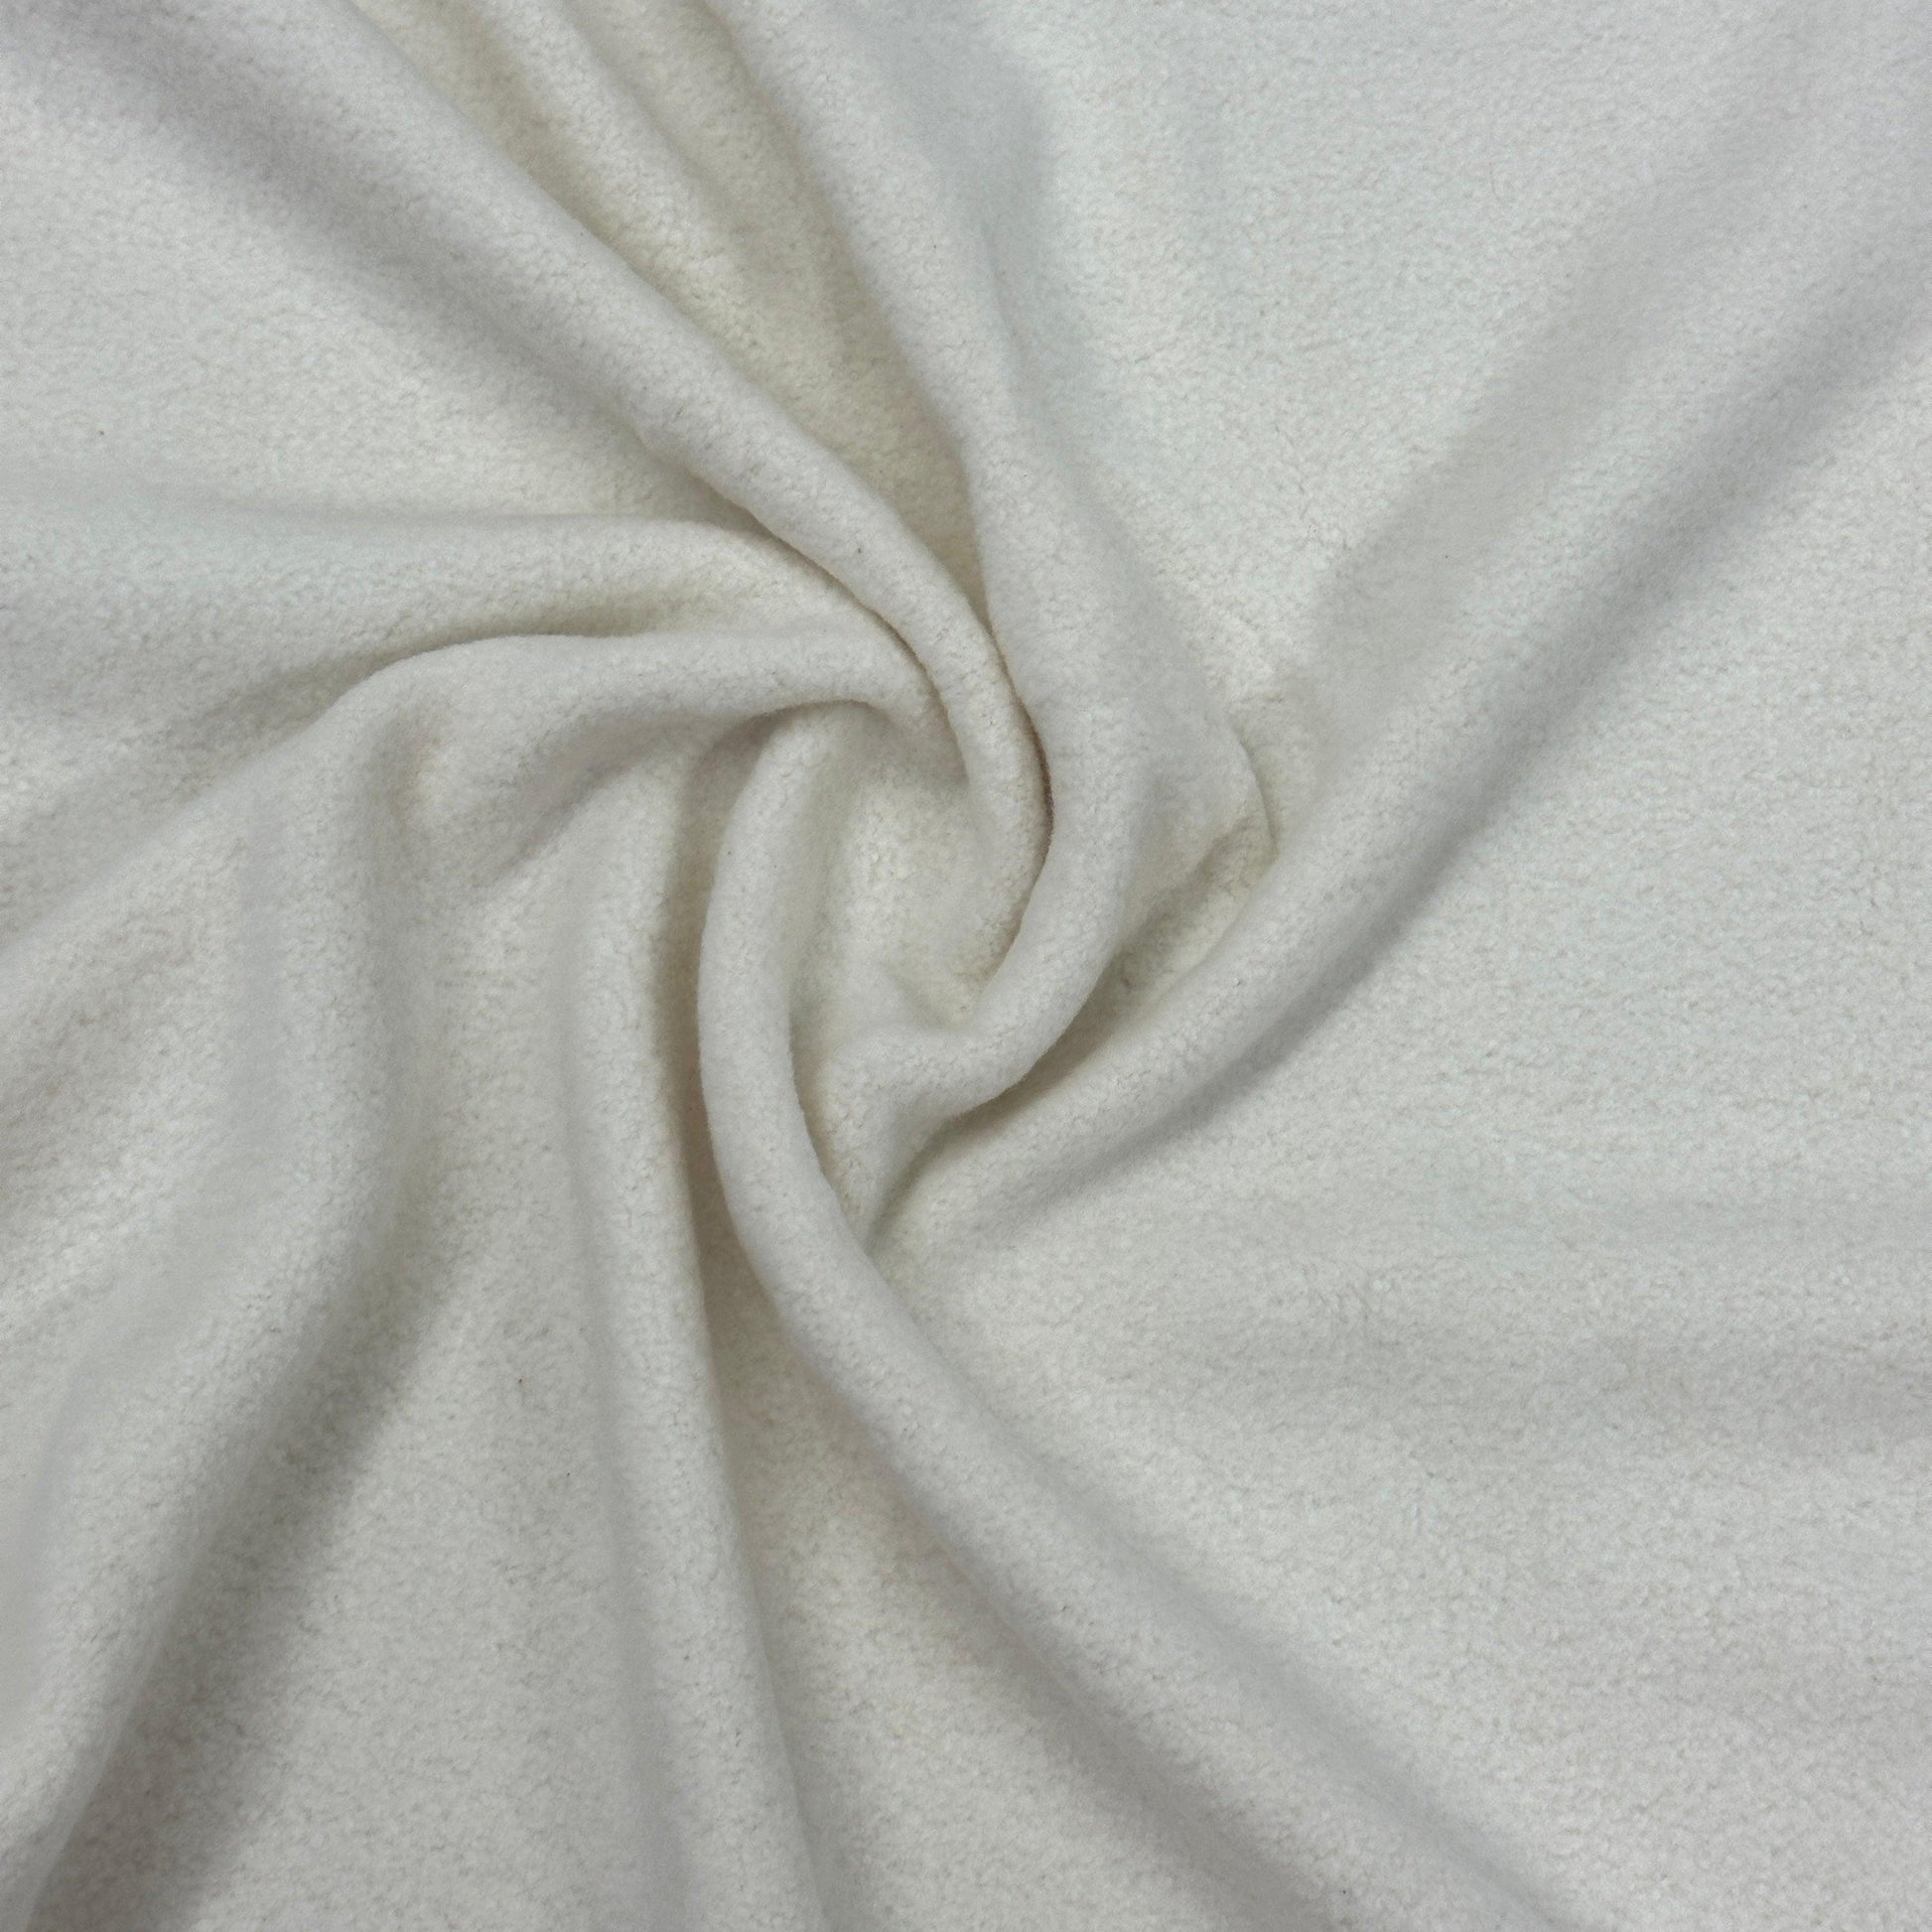 Natural Organic Cotton Sherpa Fabric - 400 GSM - Knit in the USA - Nature's Fabrics